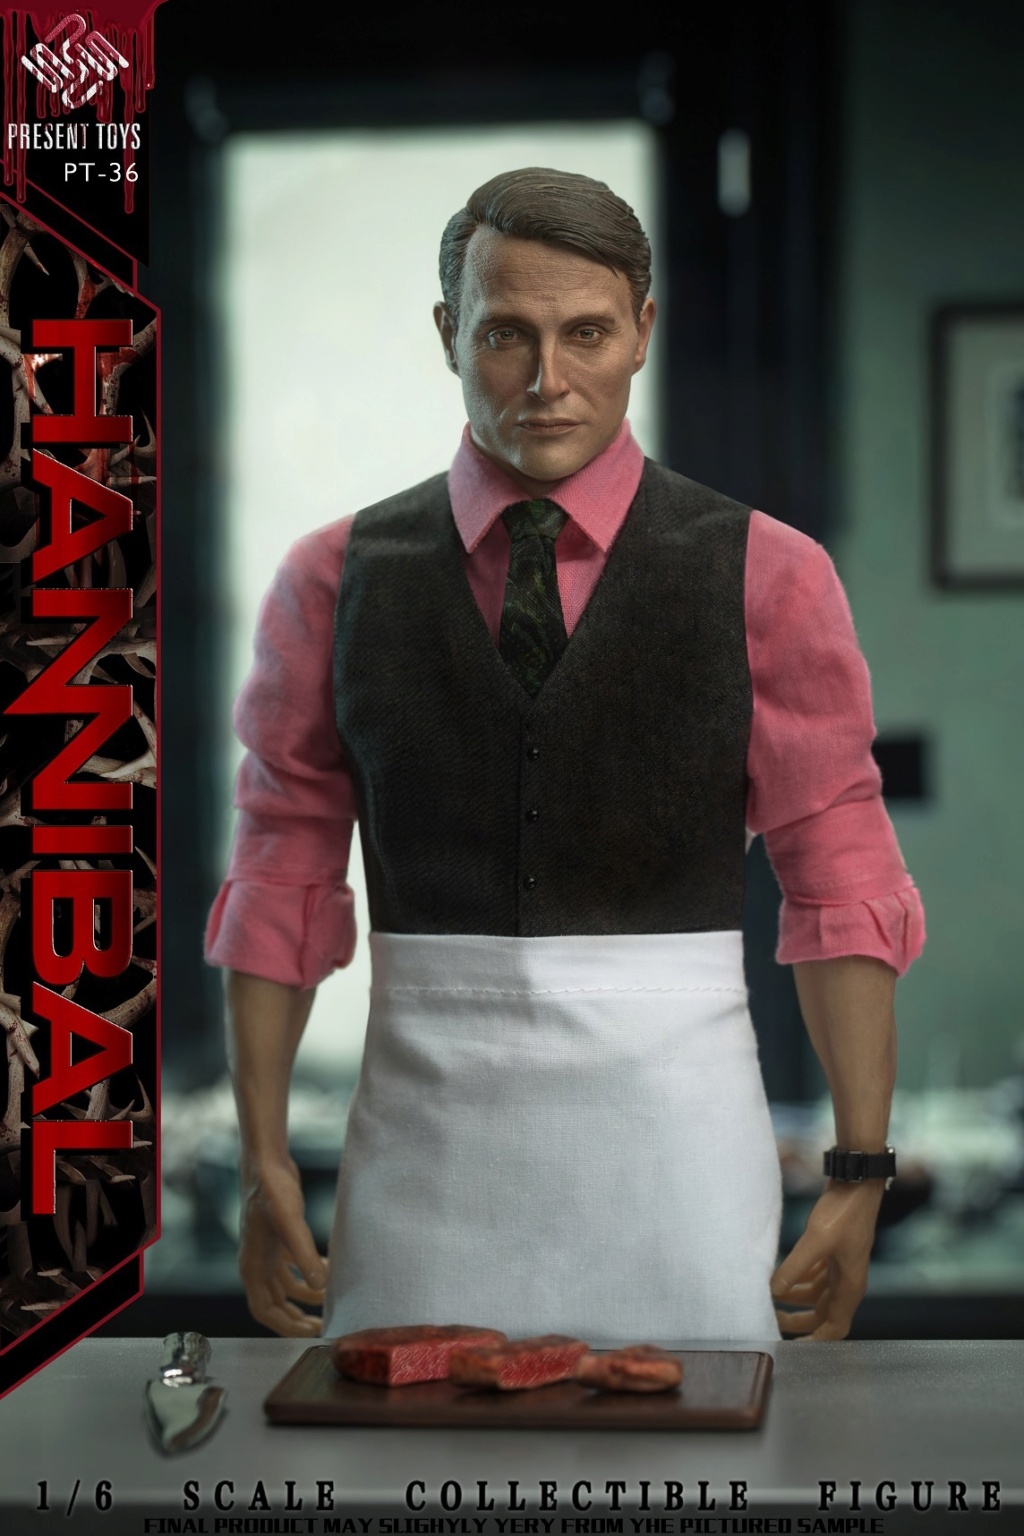 NEW PRODUCT: PRESENT TOYS: 1/6 Hannibal Action Figure #PT-sp36 16523410